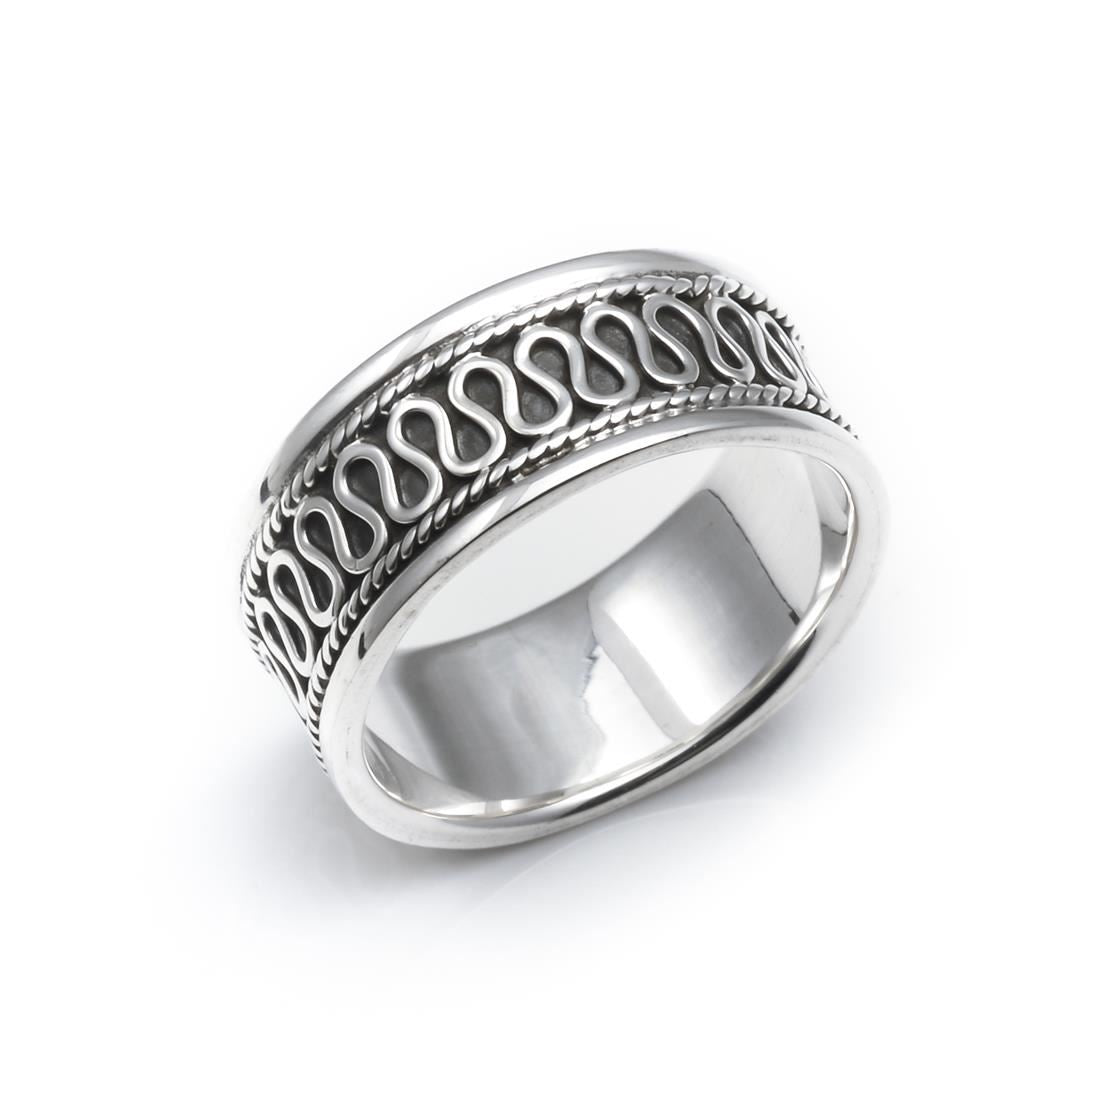 sterling silver ring, wide ring, wide band, sterling silver braided band  (R243) 